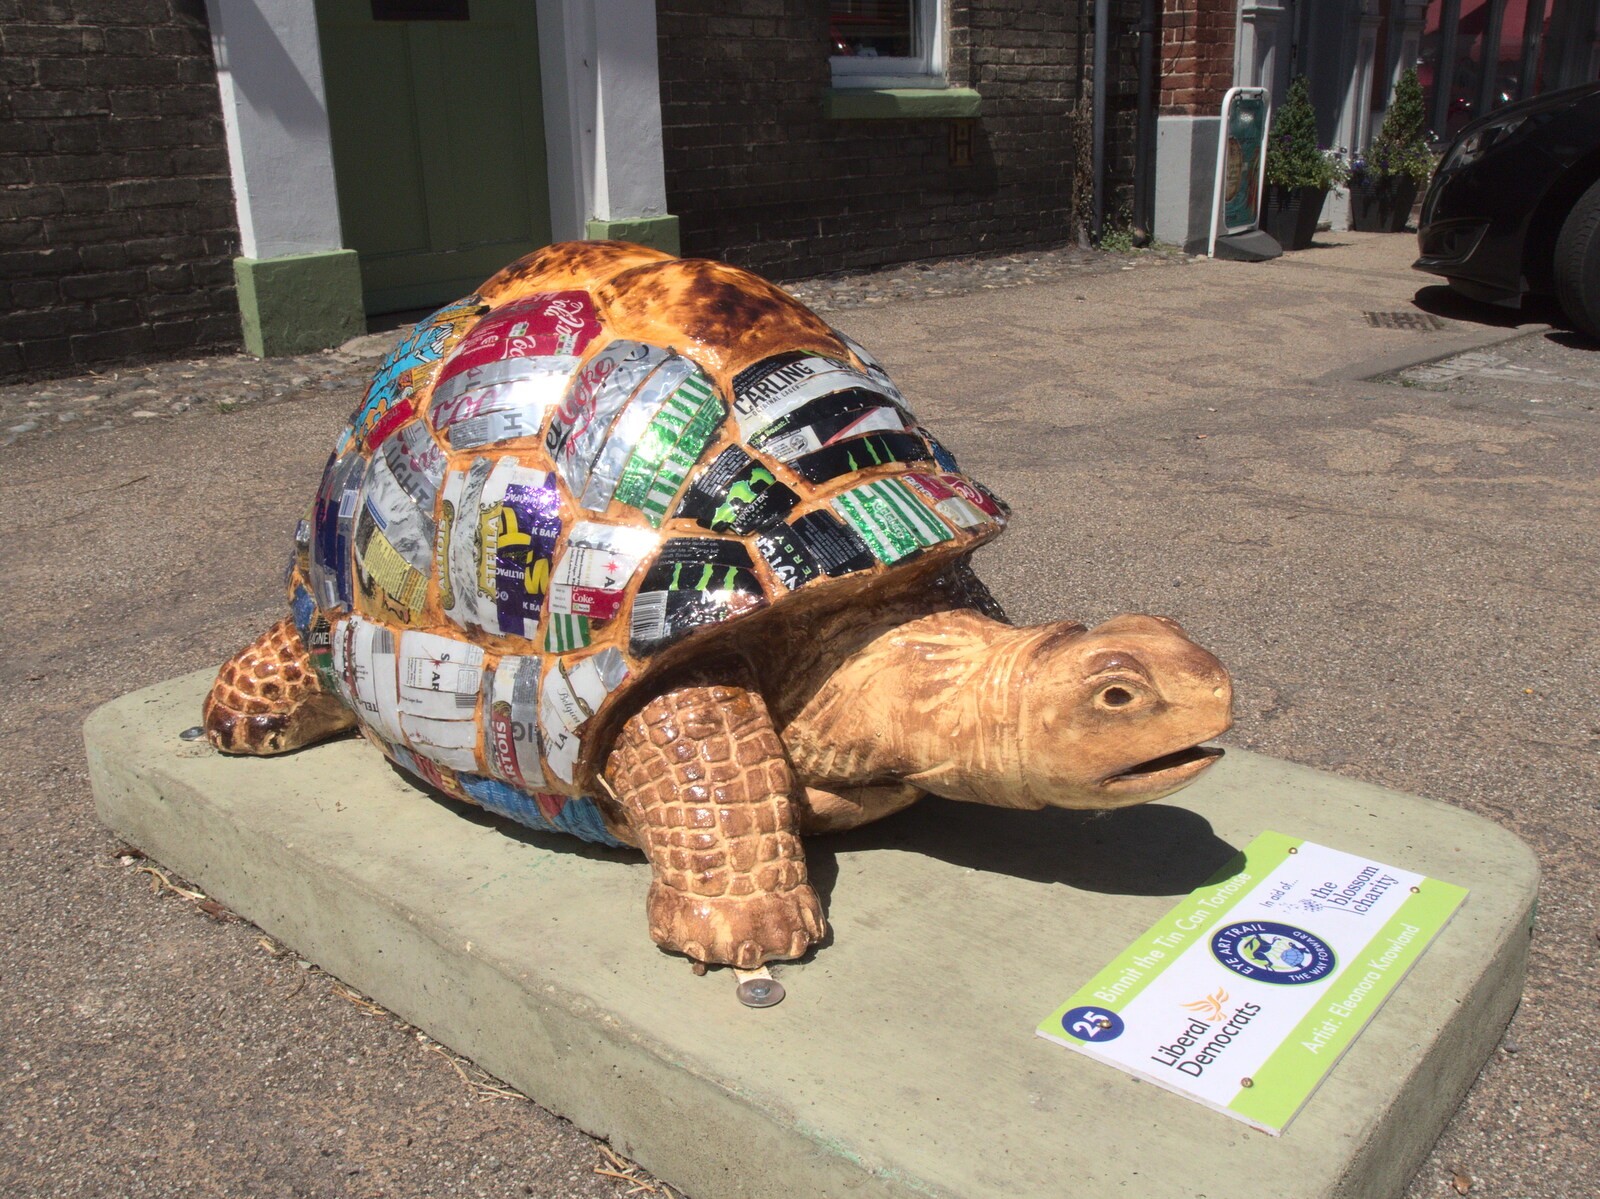 The Liberal Democrats' tortoise from Hares, Tortoises and Station 119, Eye, Suffolk - 19th July 2021